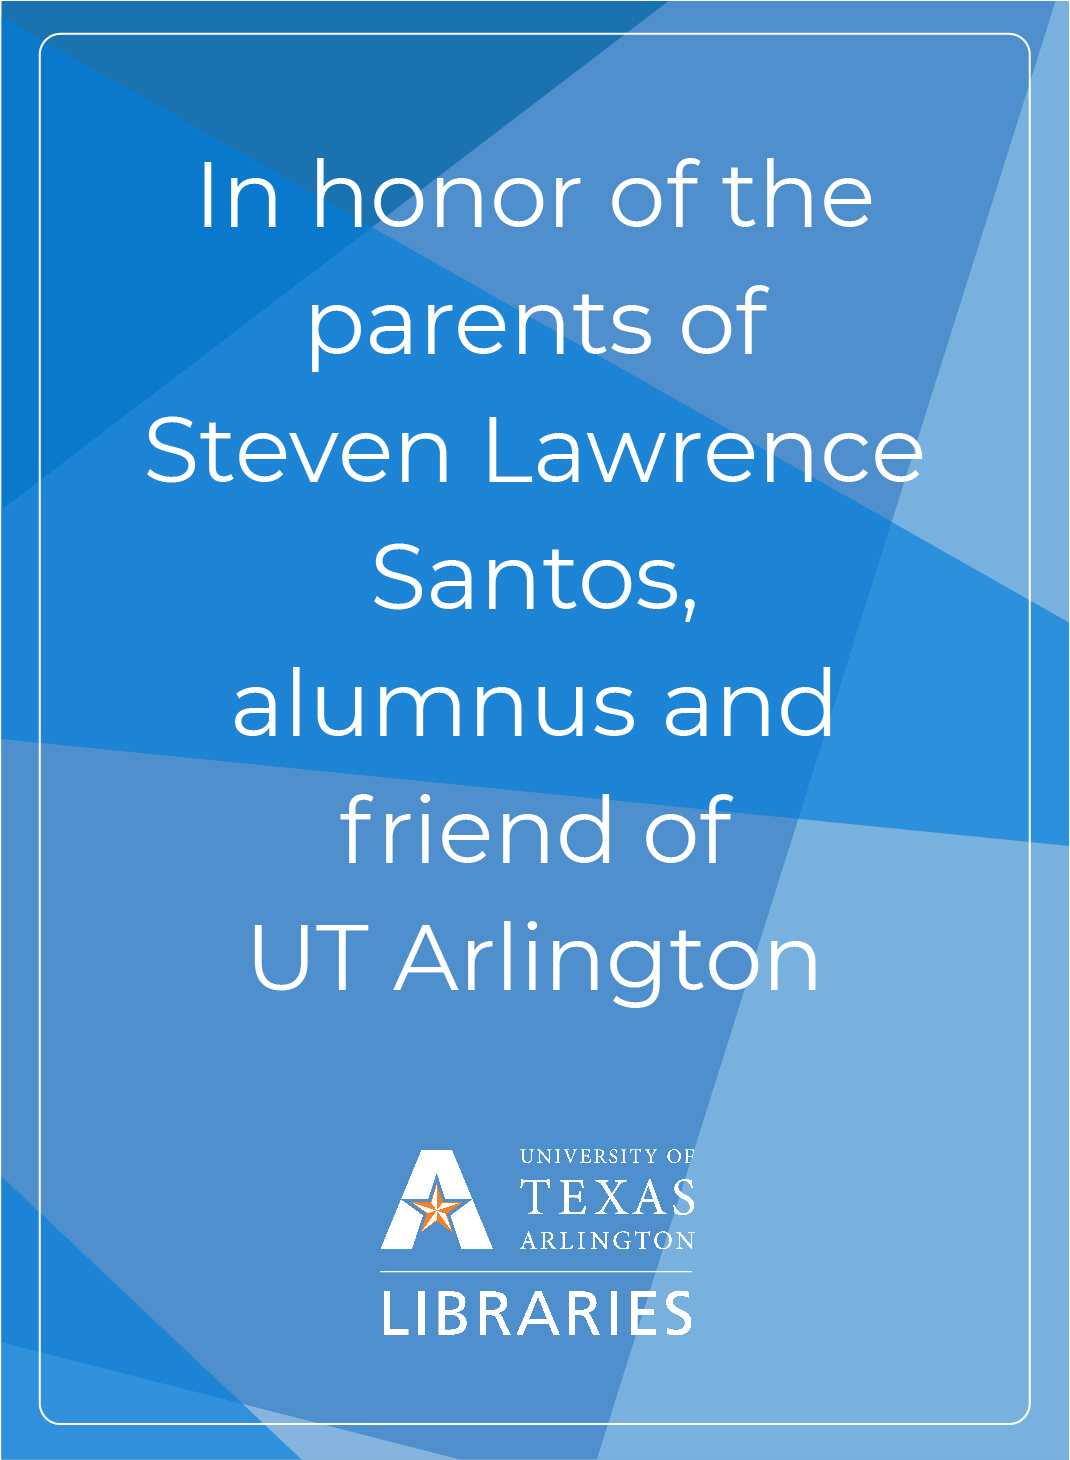 "In Honor of the parents of Steven Lawrence Santos, alumnus and friend of U T Arlington"